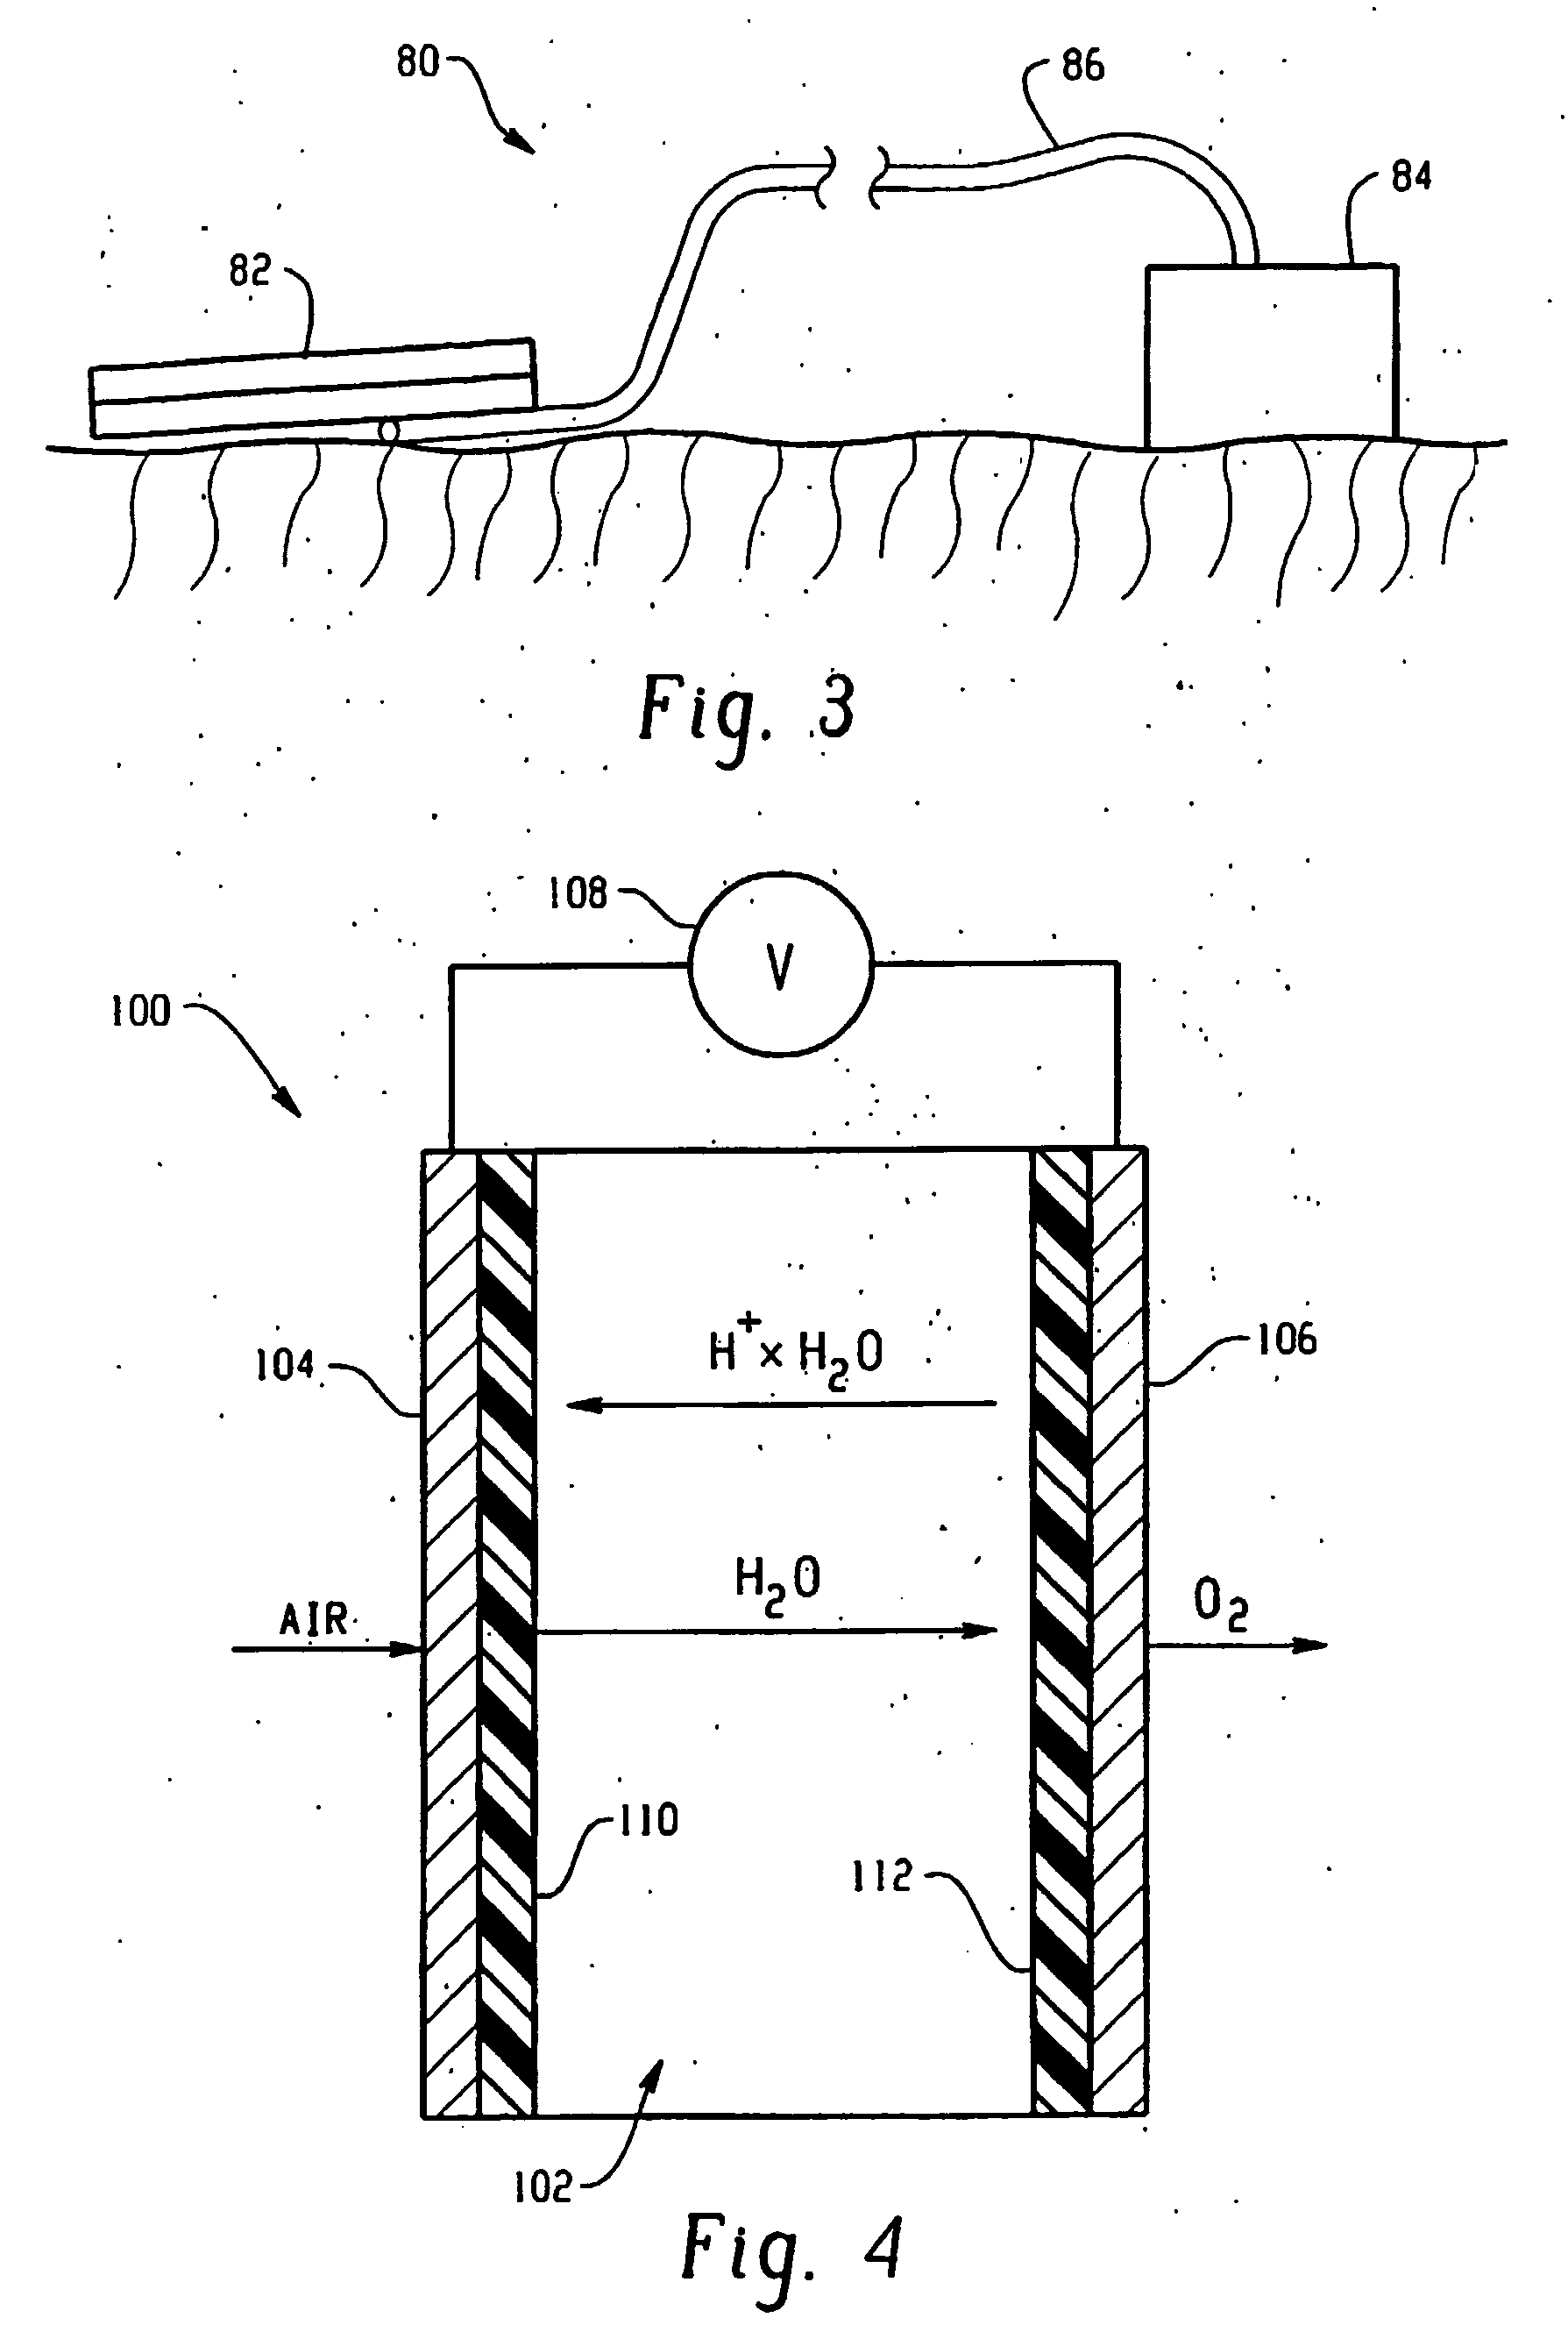 Oxygen producing device for woundcare